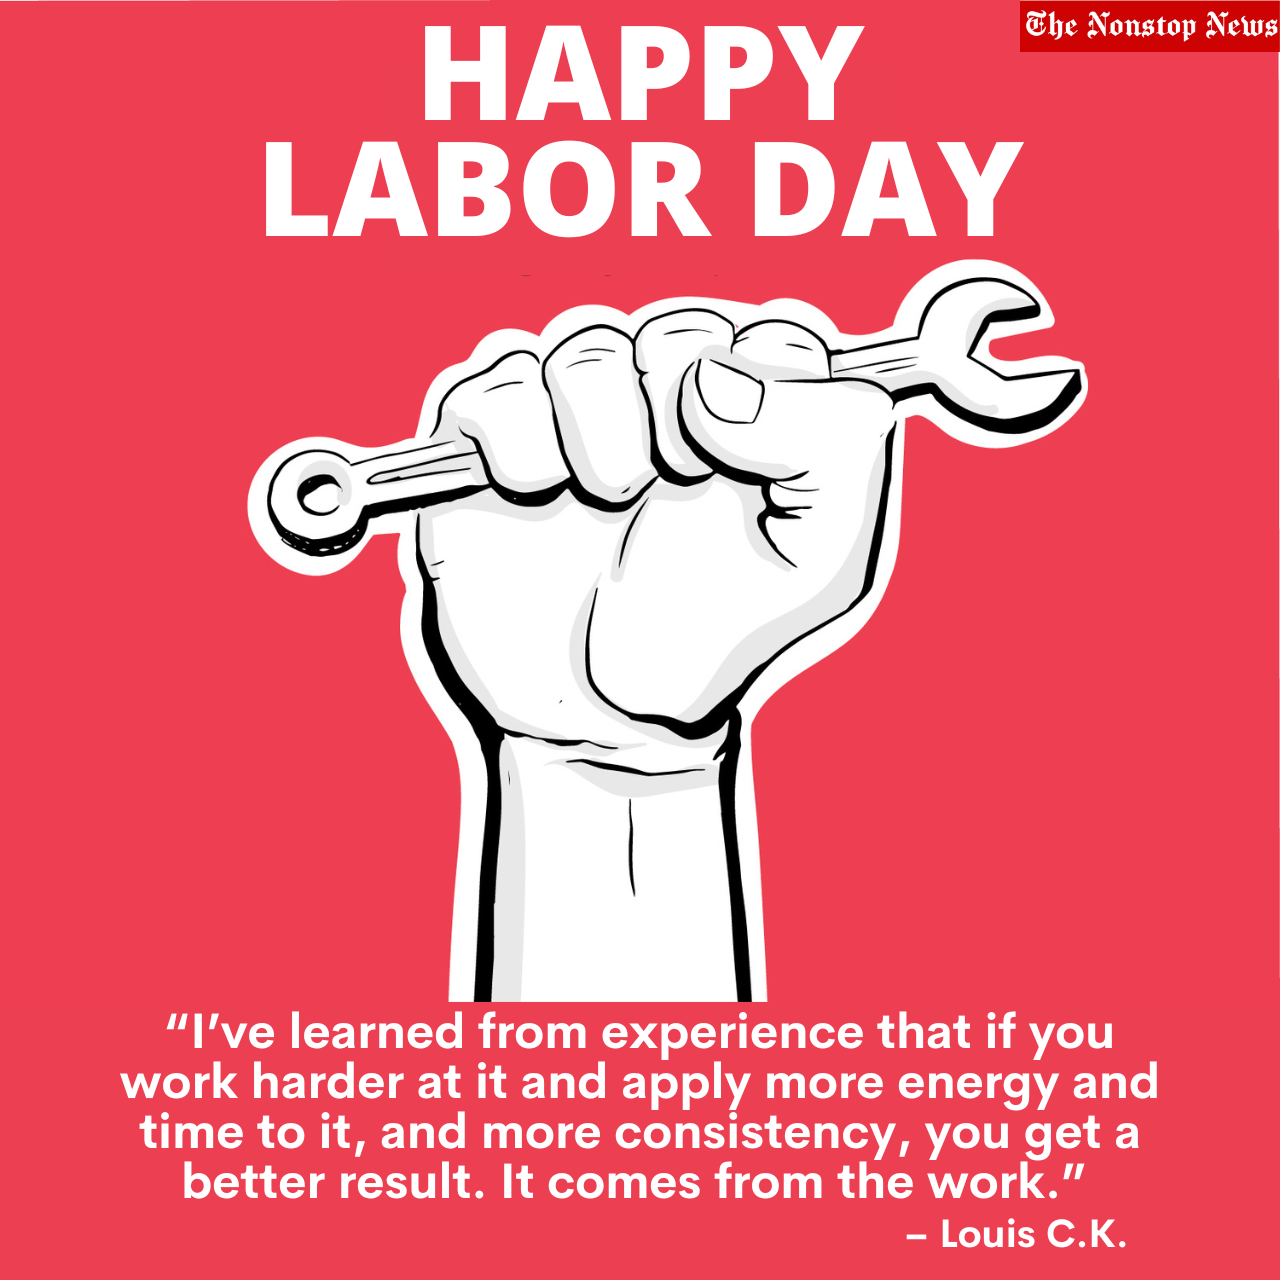 Happy Labor Day 2022: Top WhatsApp Status Video To Download For Free